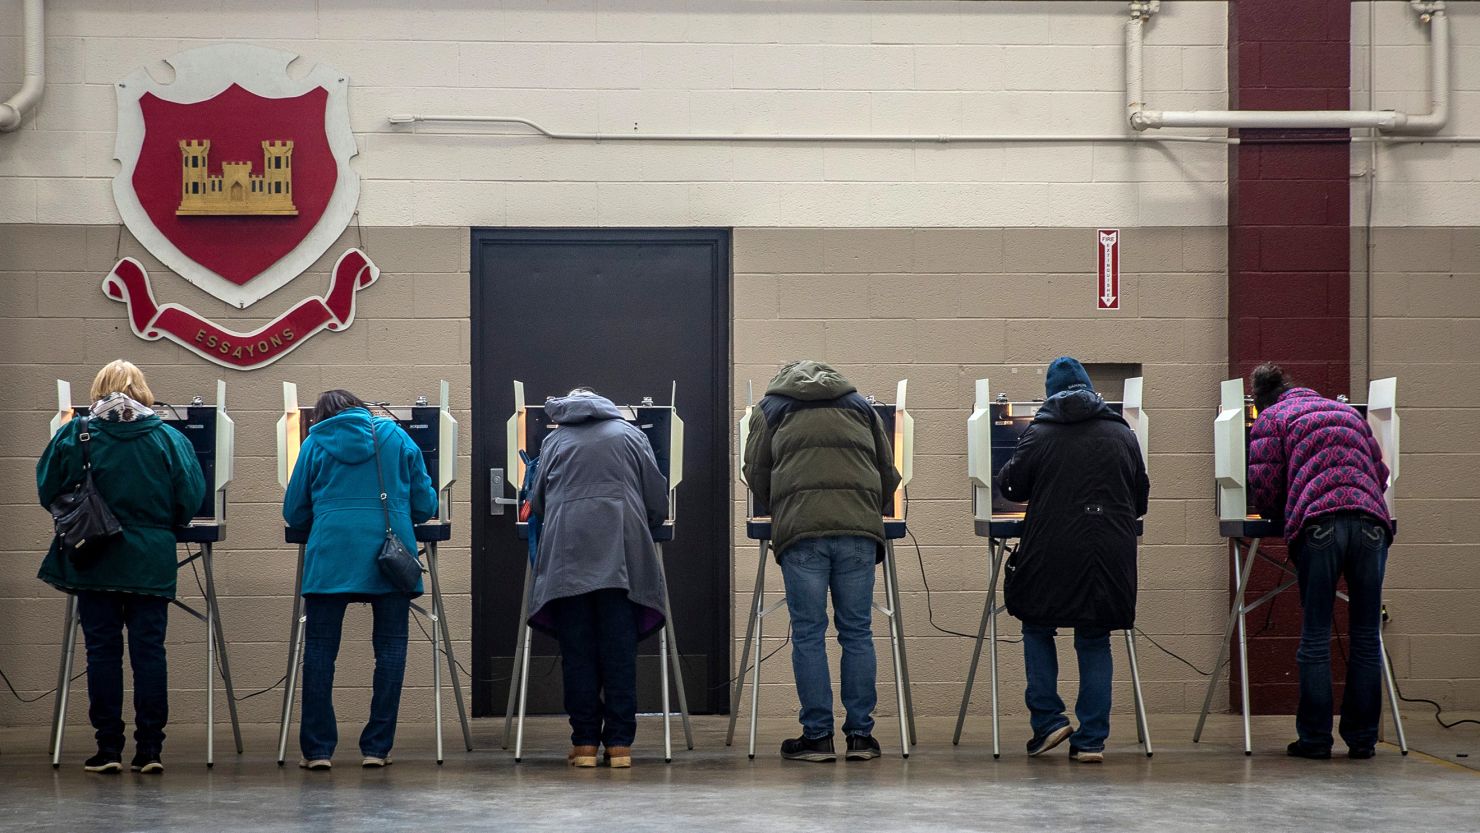 Wausau voters line up to cast their votes at the Wisconsin National Guard Armory in Wisconsin on Tuesday.